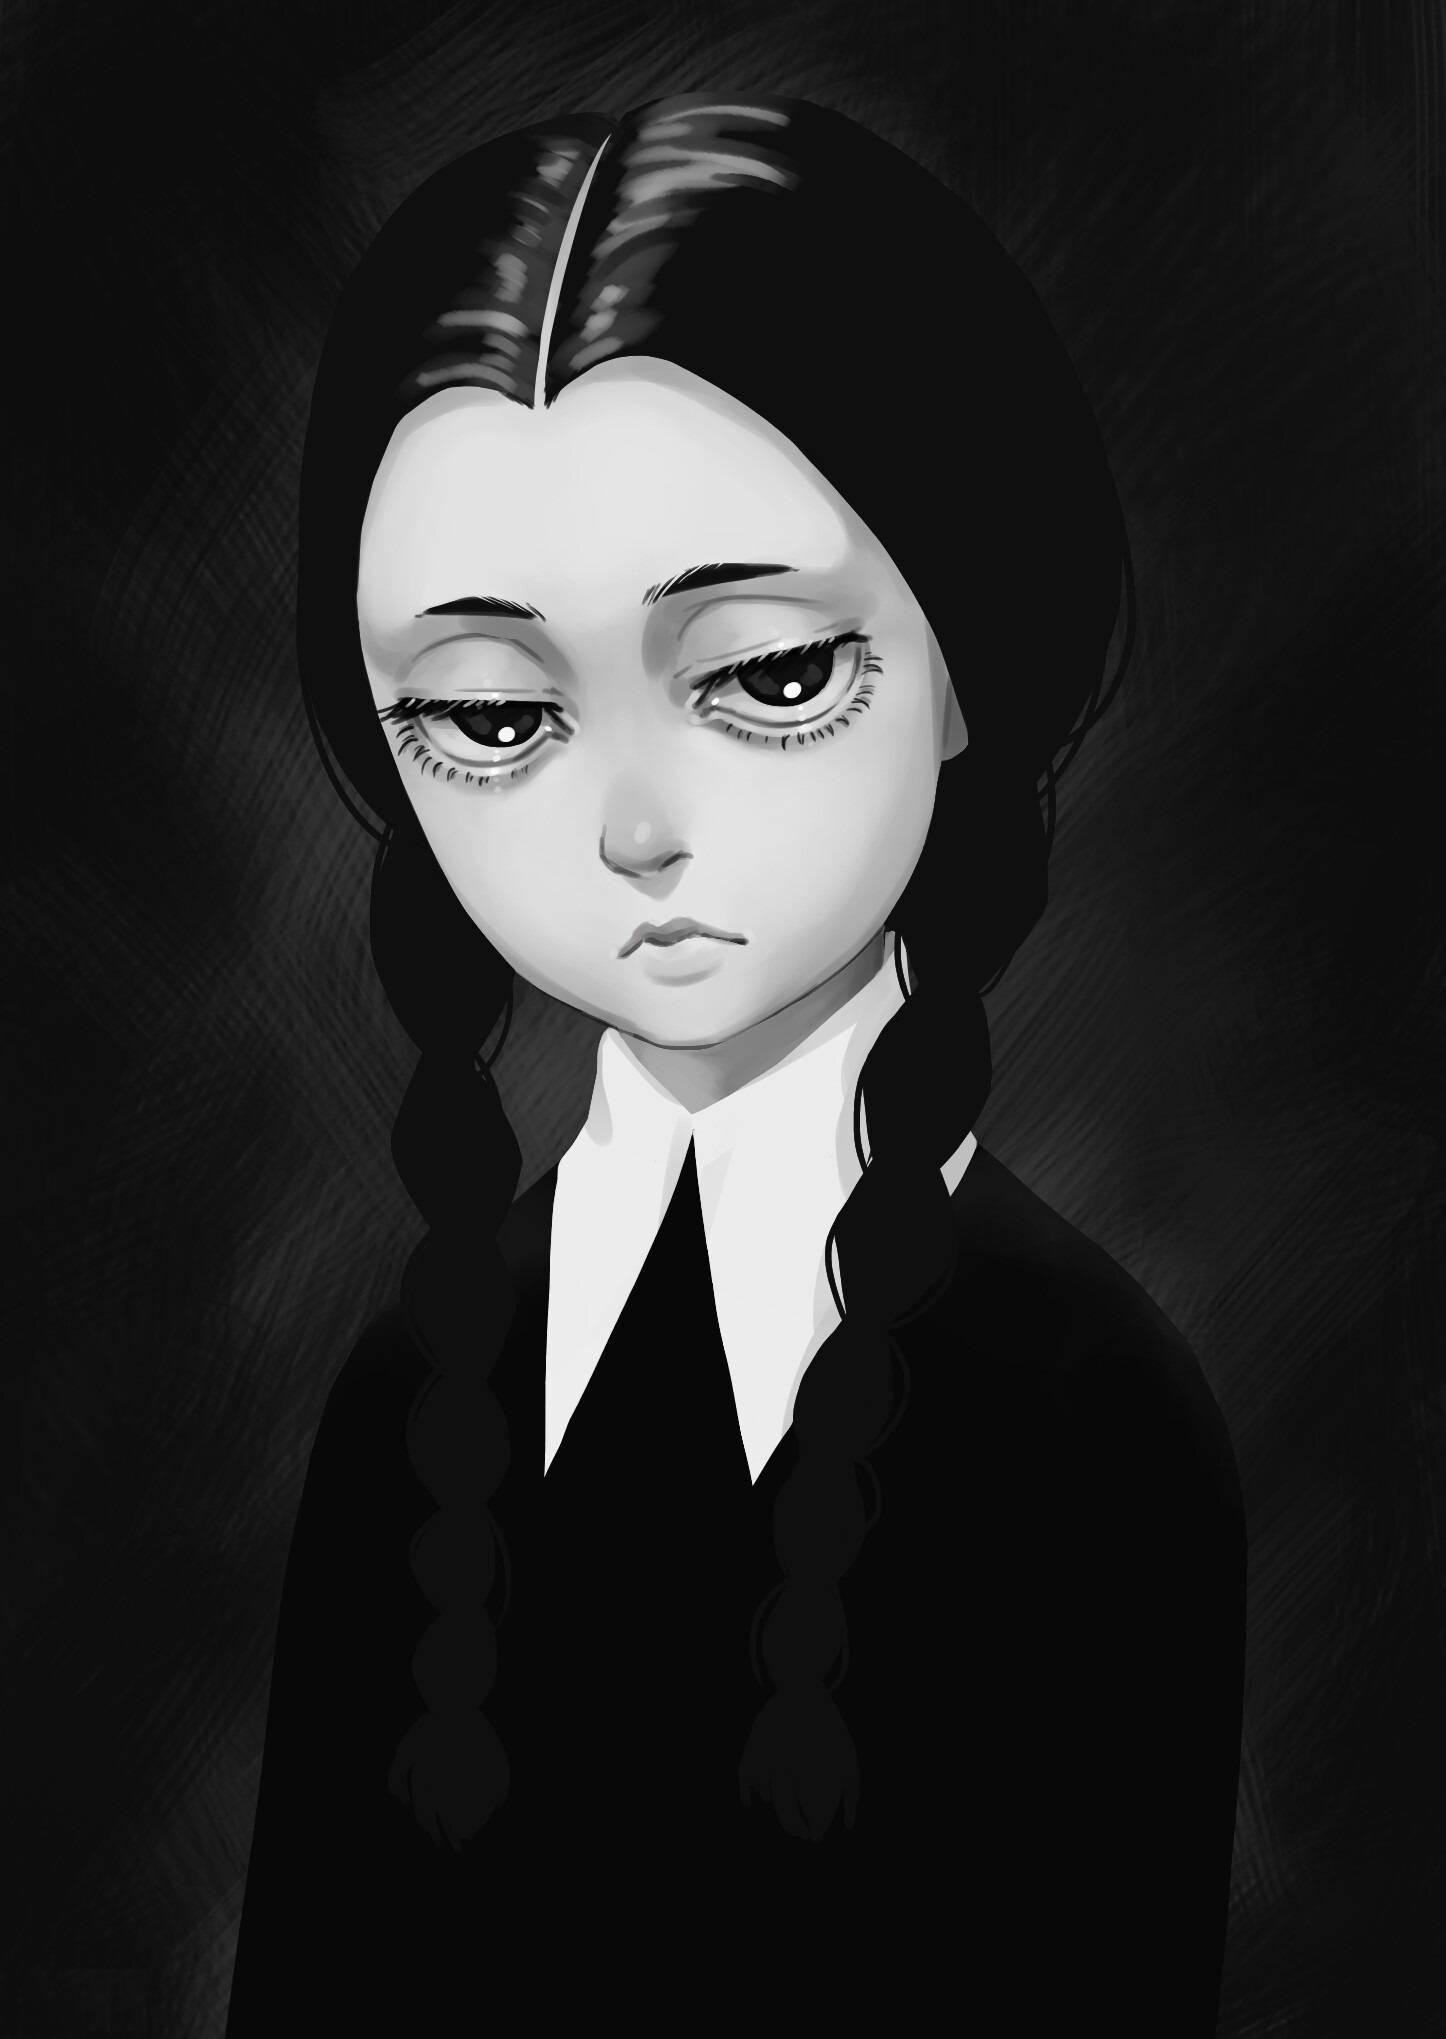 Wednesday Addams Wallpapers - Top Free Wednesday Addams Backgrounds ...